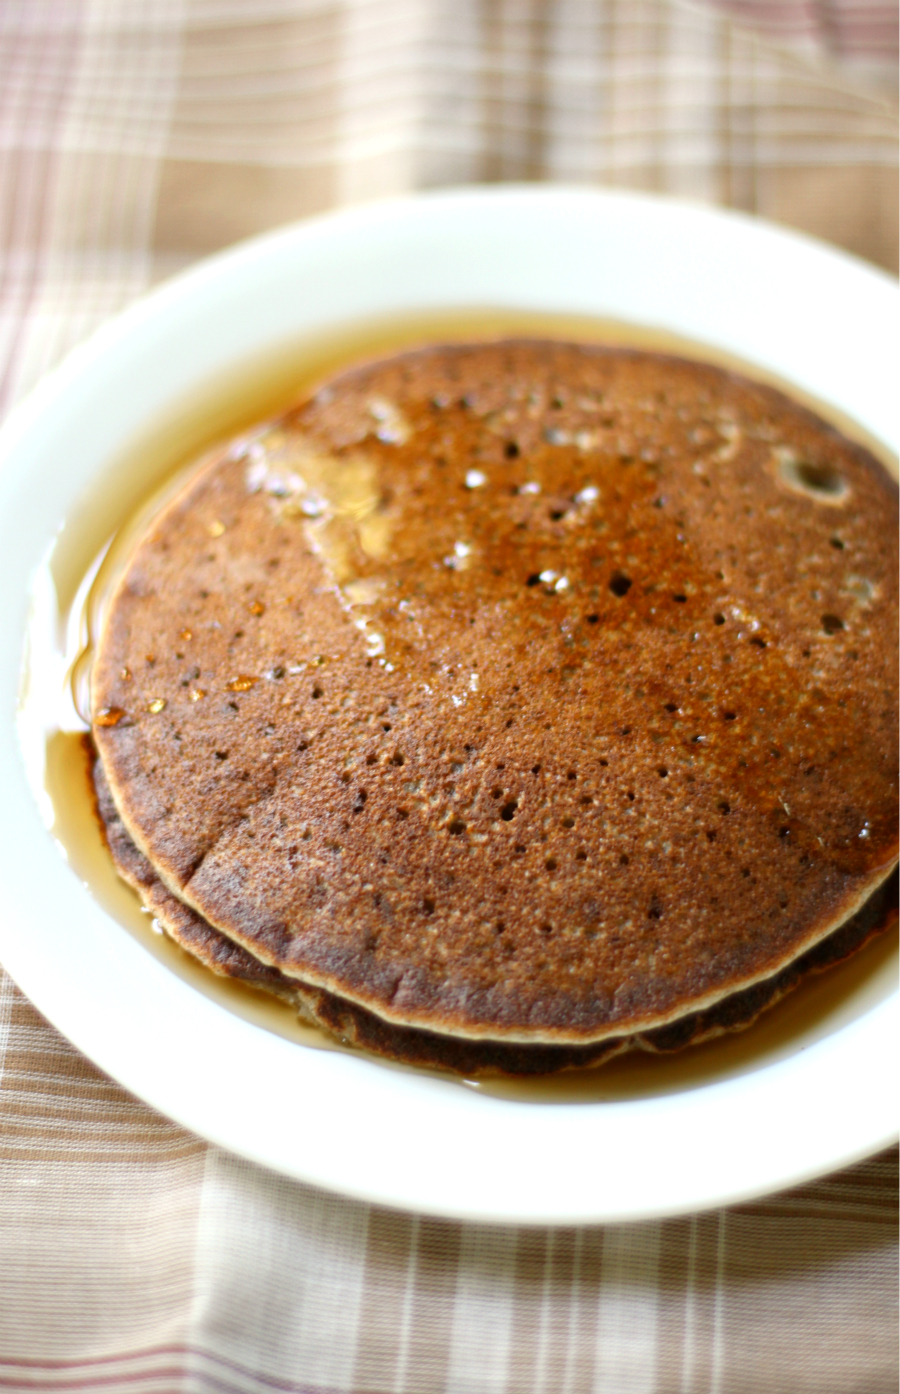 Banana Pumpkin Pancakes | Strength and Sunshine @RebeccaGF666 A sweet and healthy seasonal breakfast recipe for a lazy and cold weekend morning! Banana Pumpkin Pancakes that are gluten-free, vegan, allergy-free, and nut-free making them perfect for any hungry mouth that needs feeding!